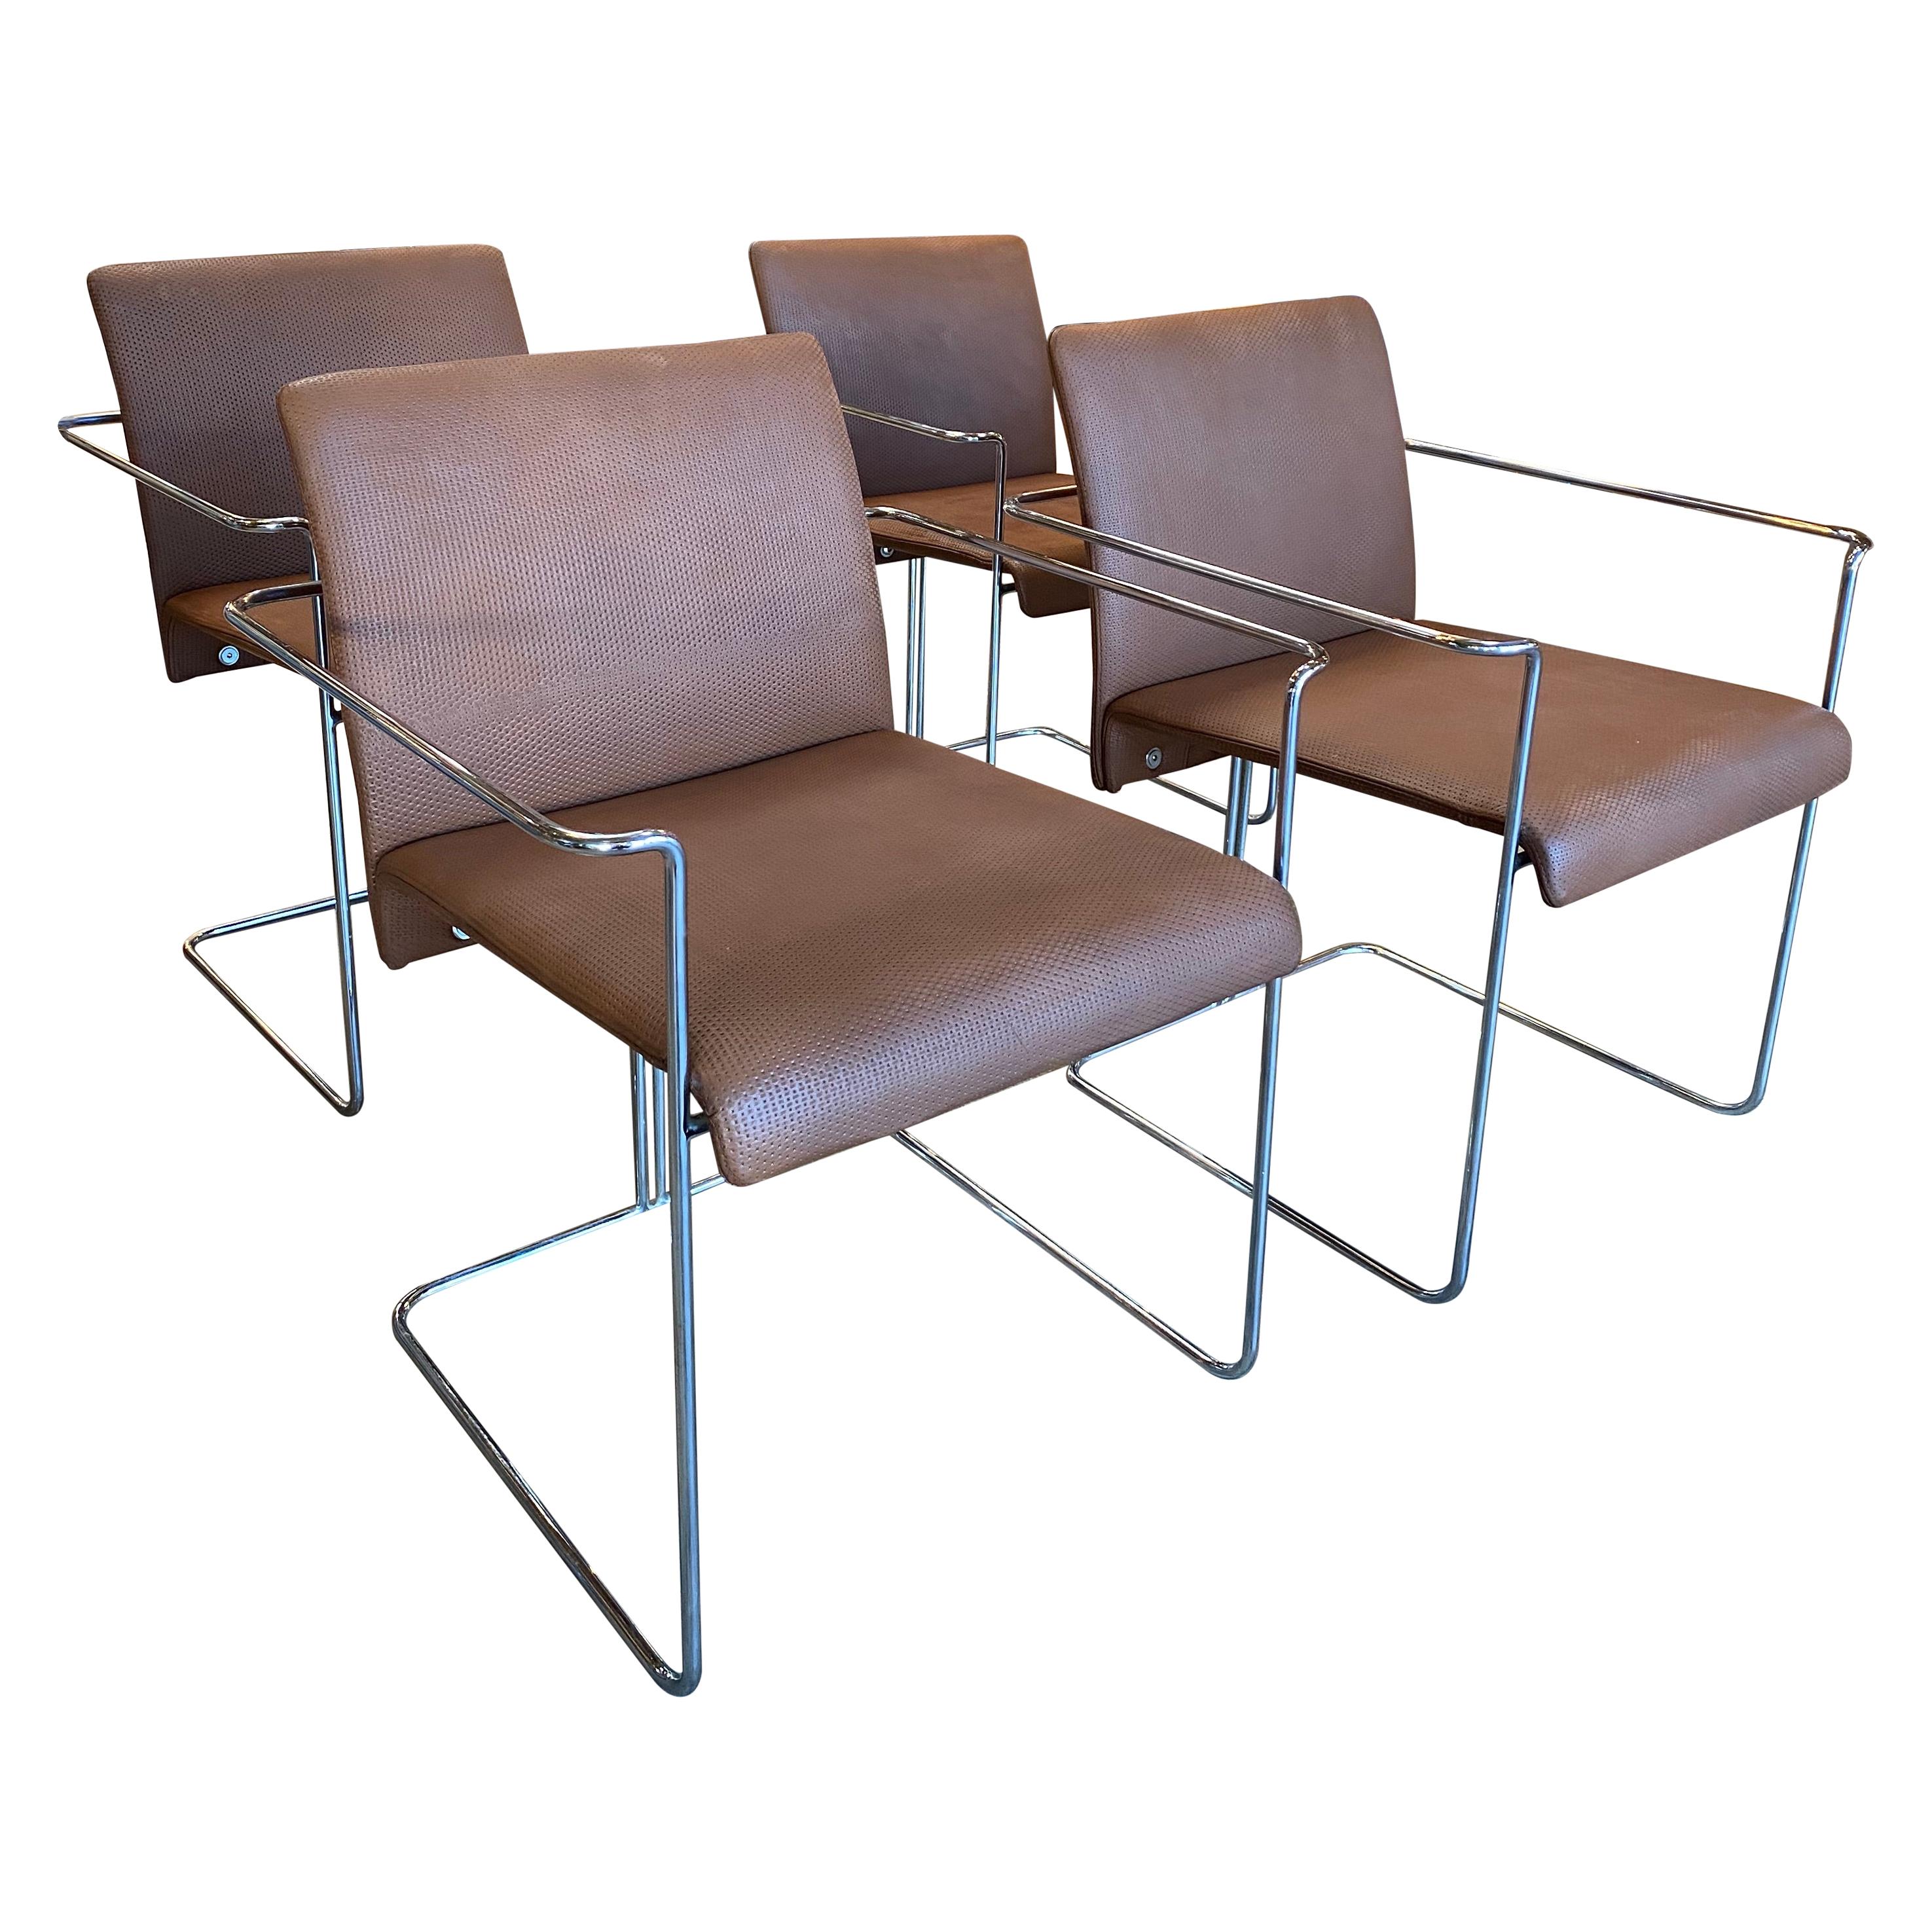 Set of 4 Dining Chairs Leather and Chrome by F.ll Saporiti, 1970s